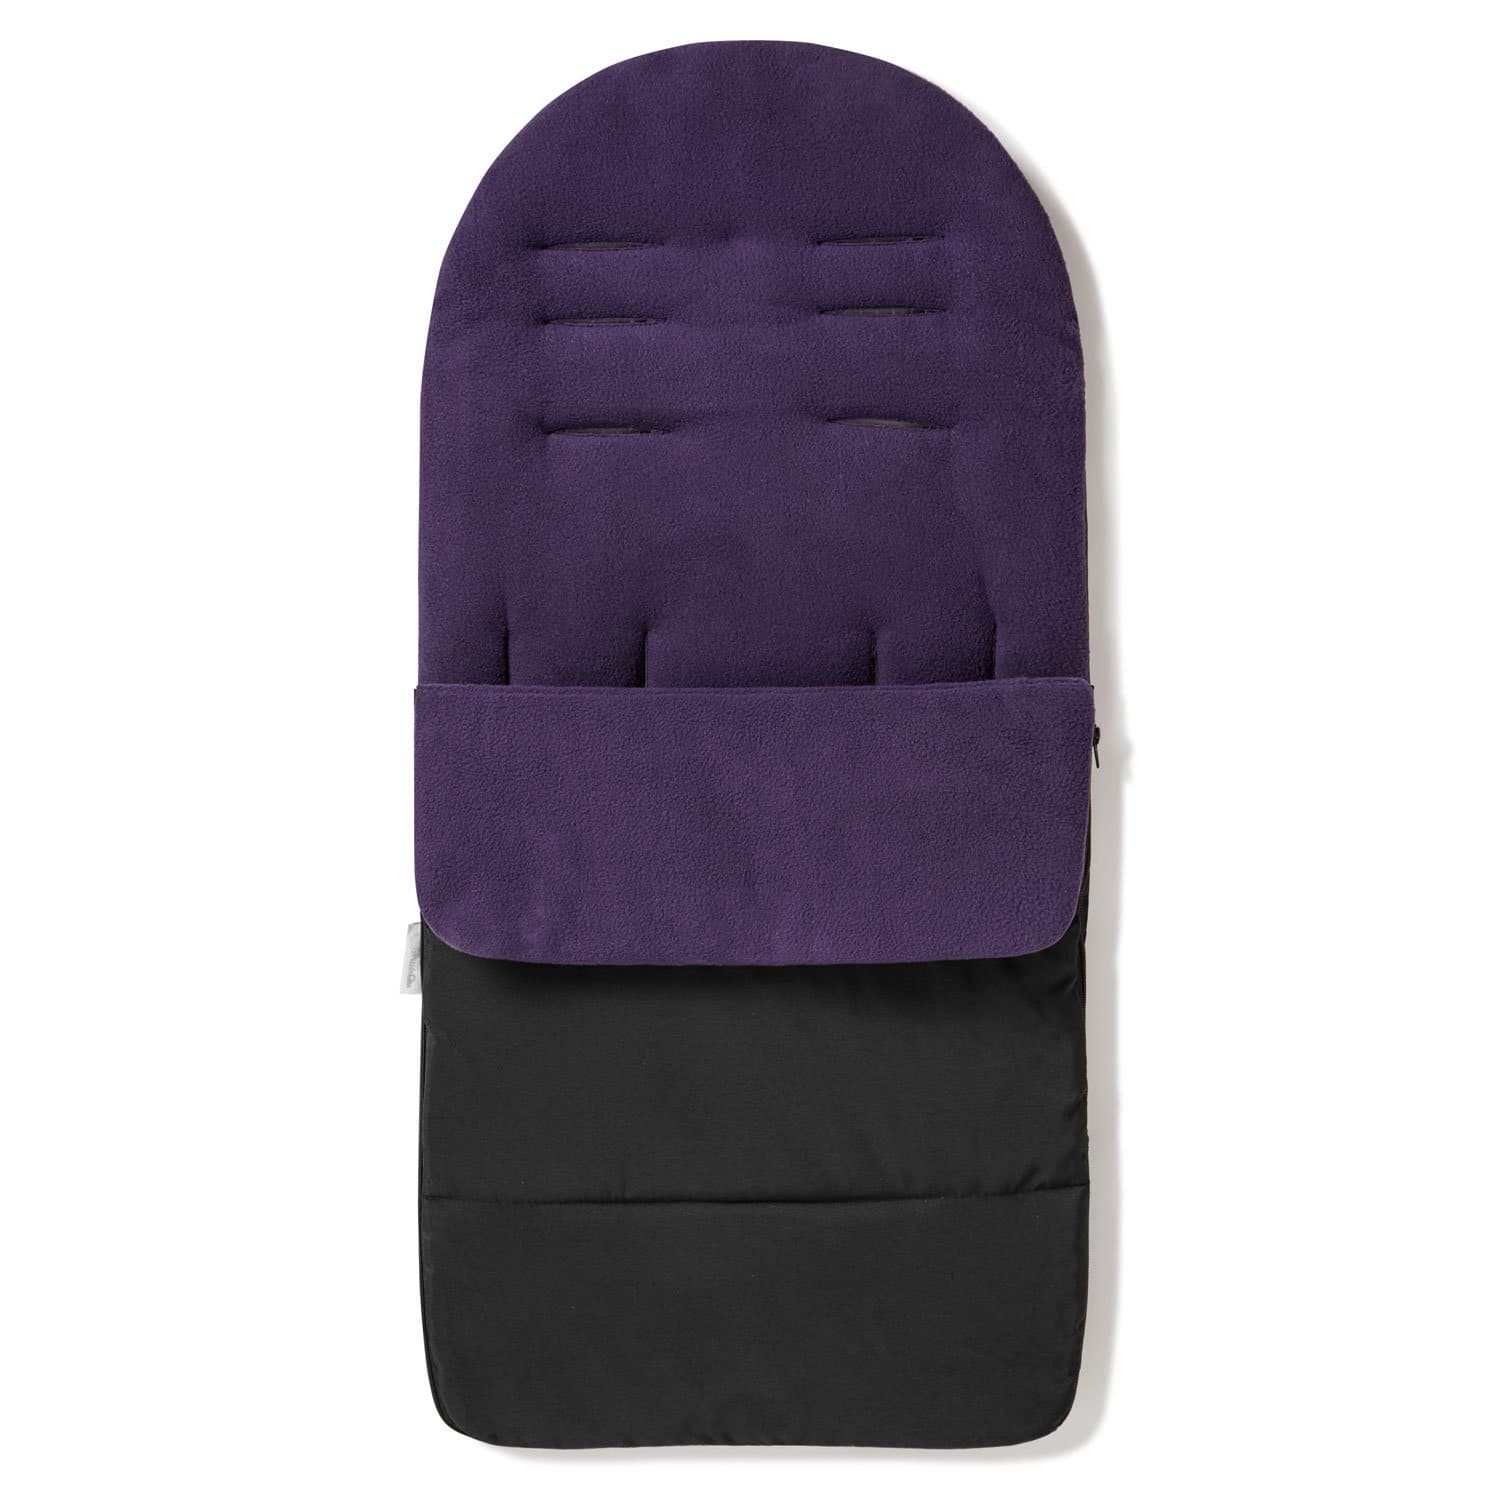 Premium Footmuff / Cosy Toes Compatible with Concord - Plum Purple / Fits All Models | For Your Little One